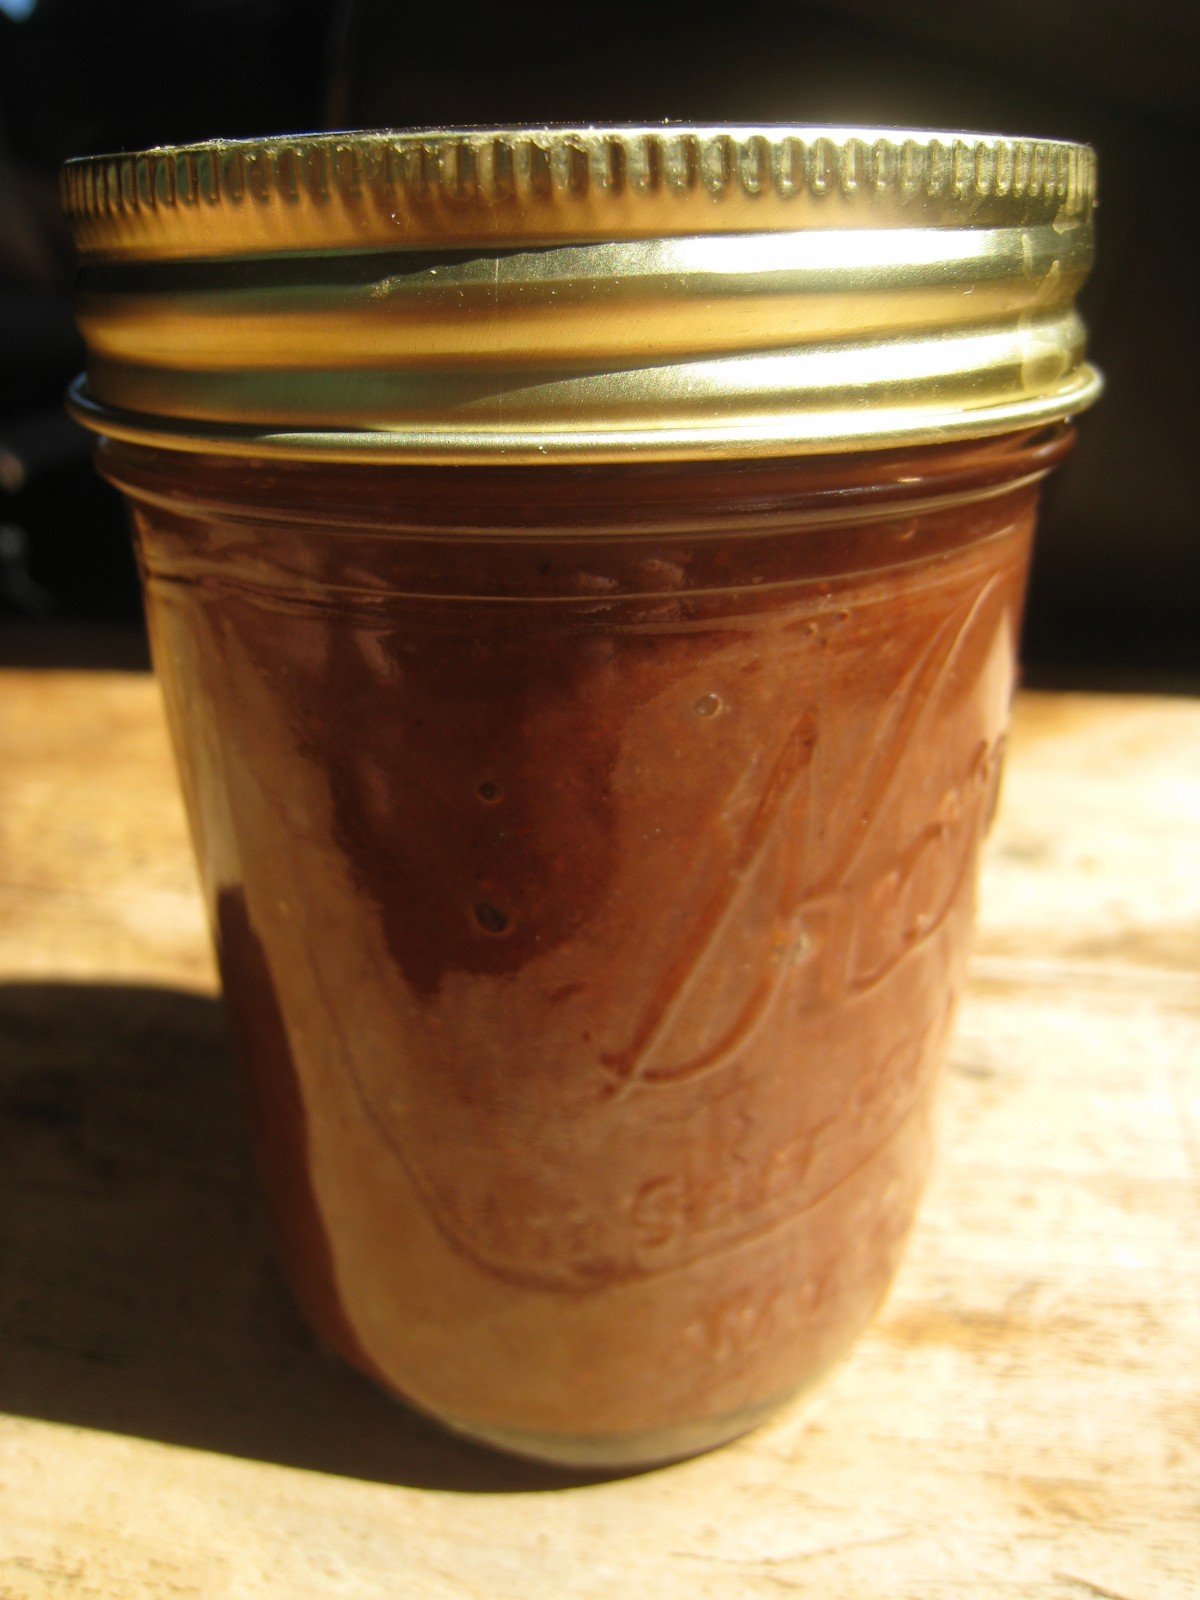 Preserving Grapes: A Recipe for Spiced Grape Butter